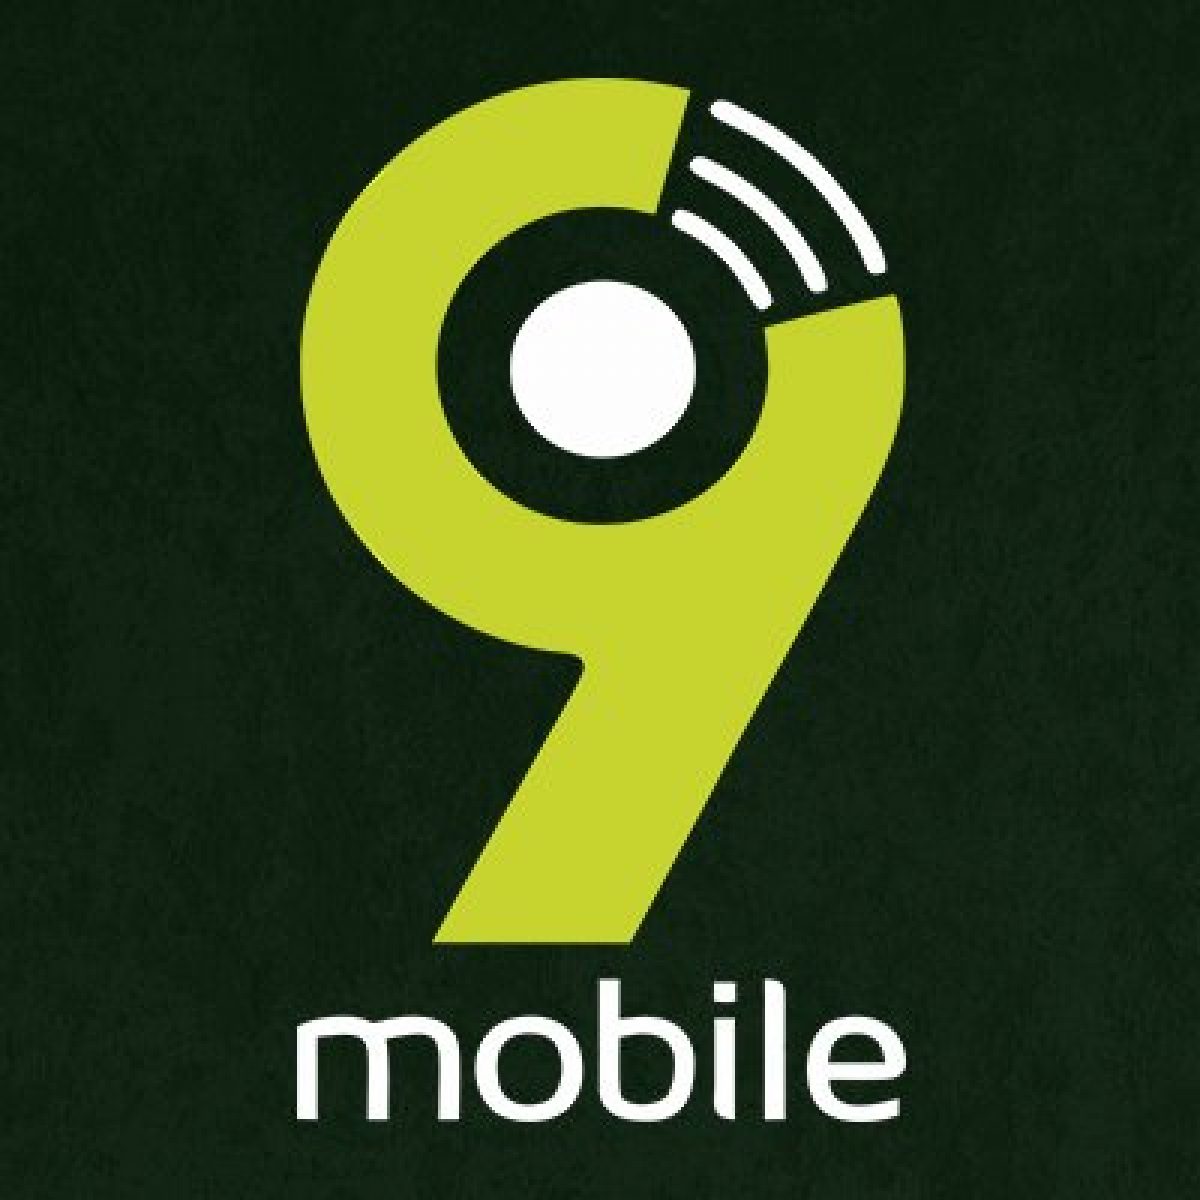 Growth Expert, Stjepan Udovicic, takes the saddle as 9mobile's Chief Commercial Officer